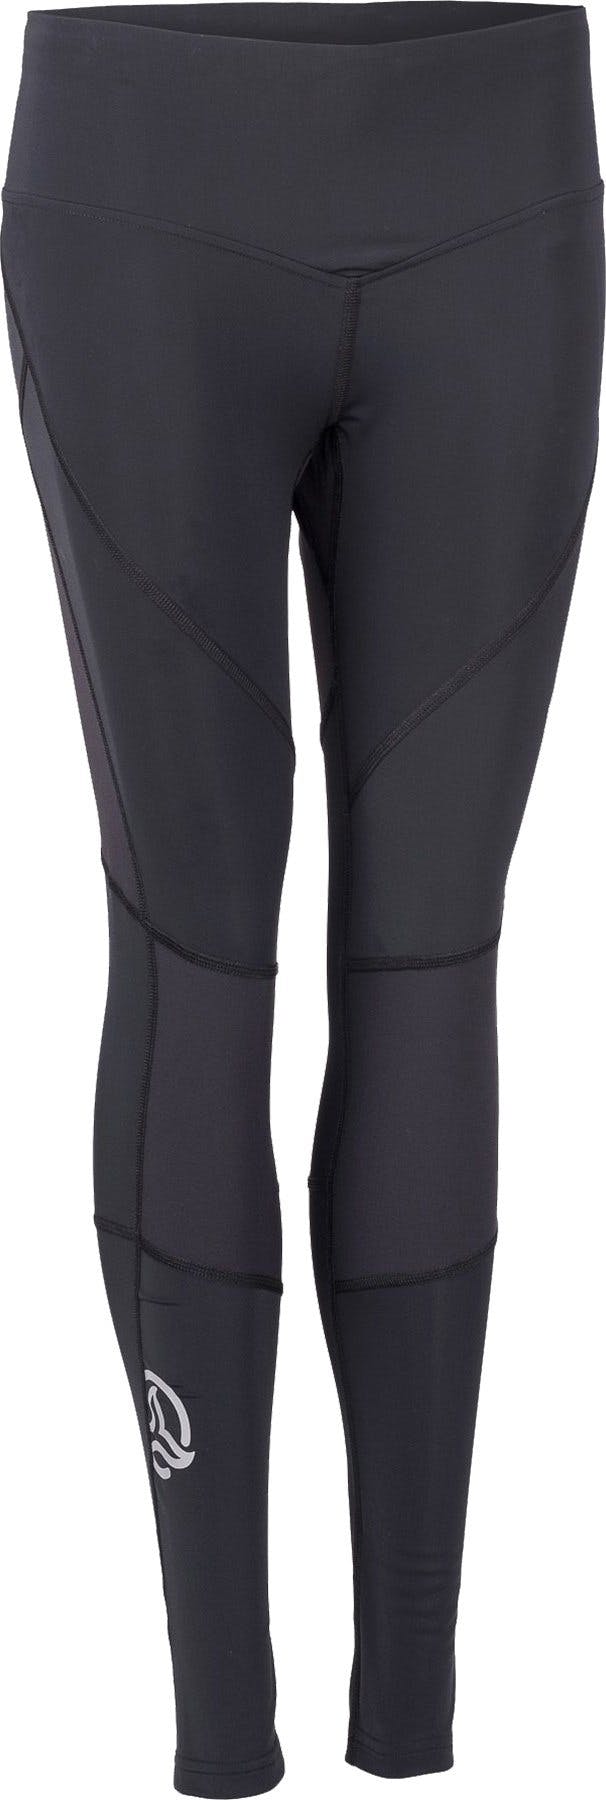 Product image for Impulse Tights - Women's